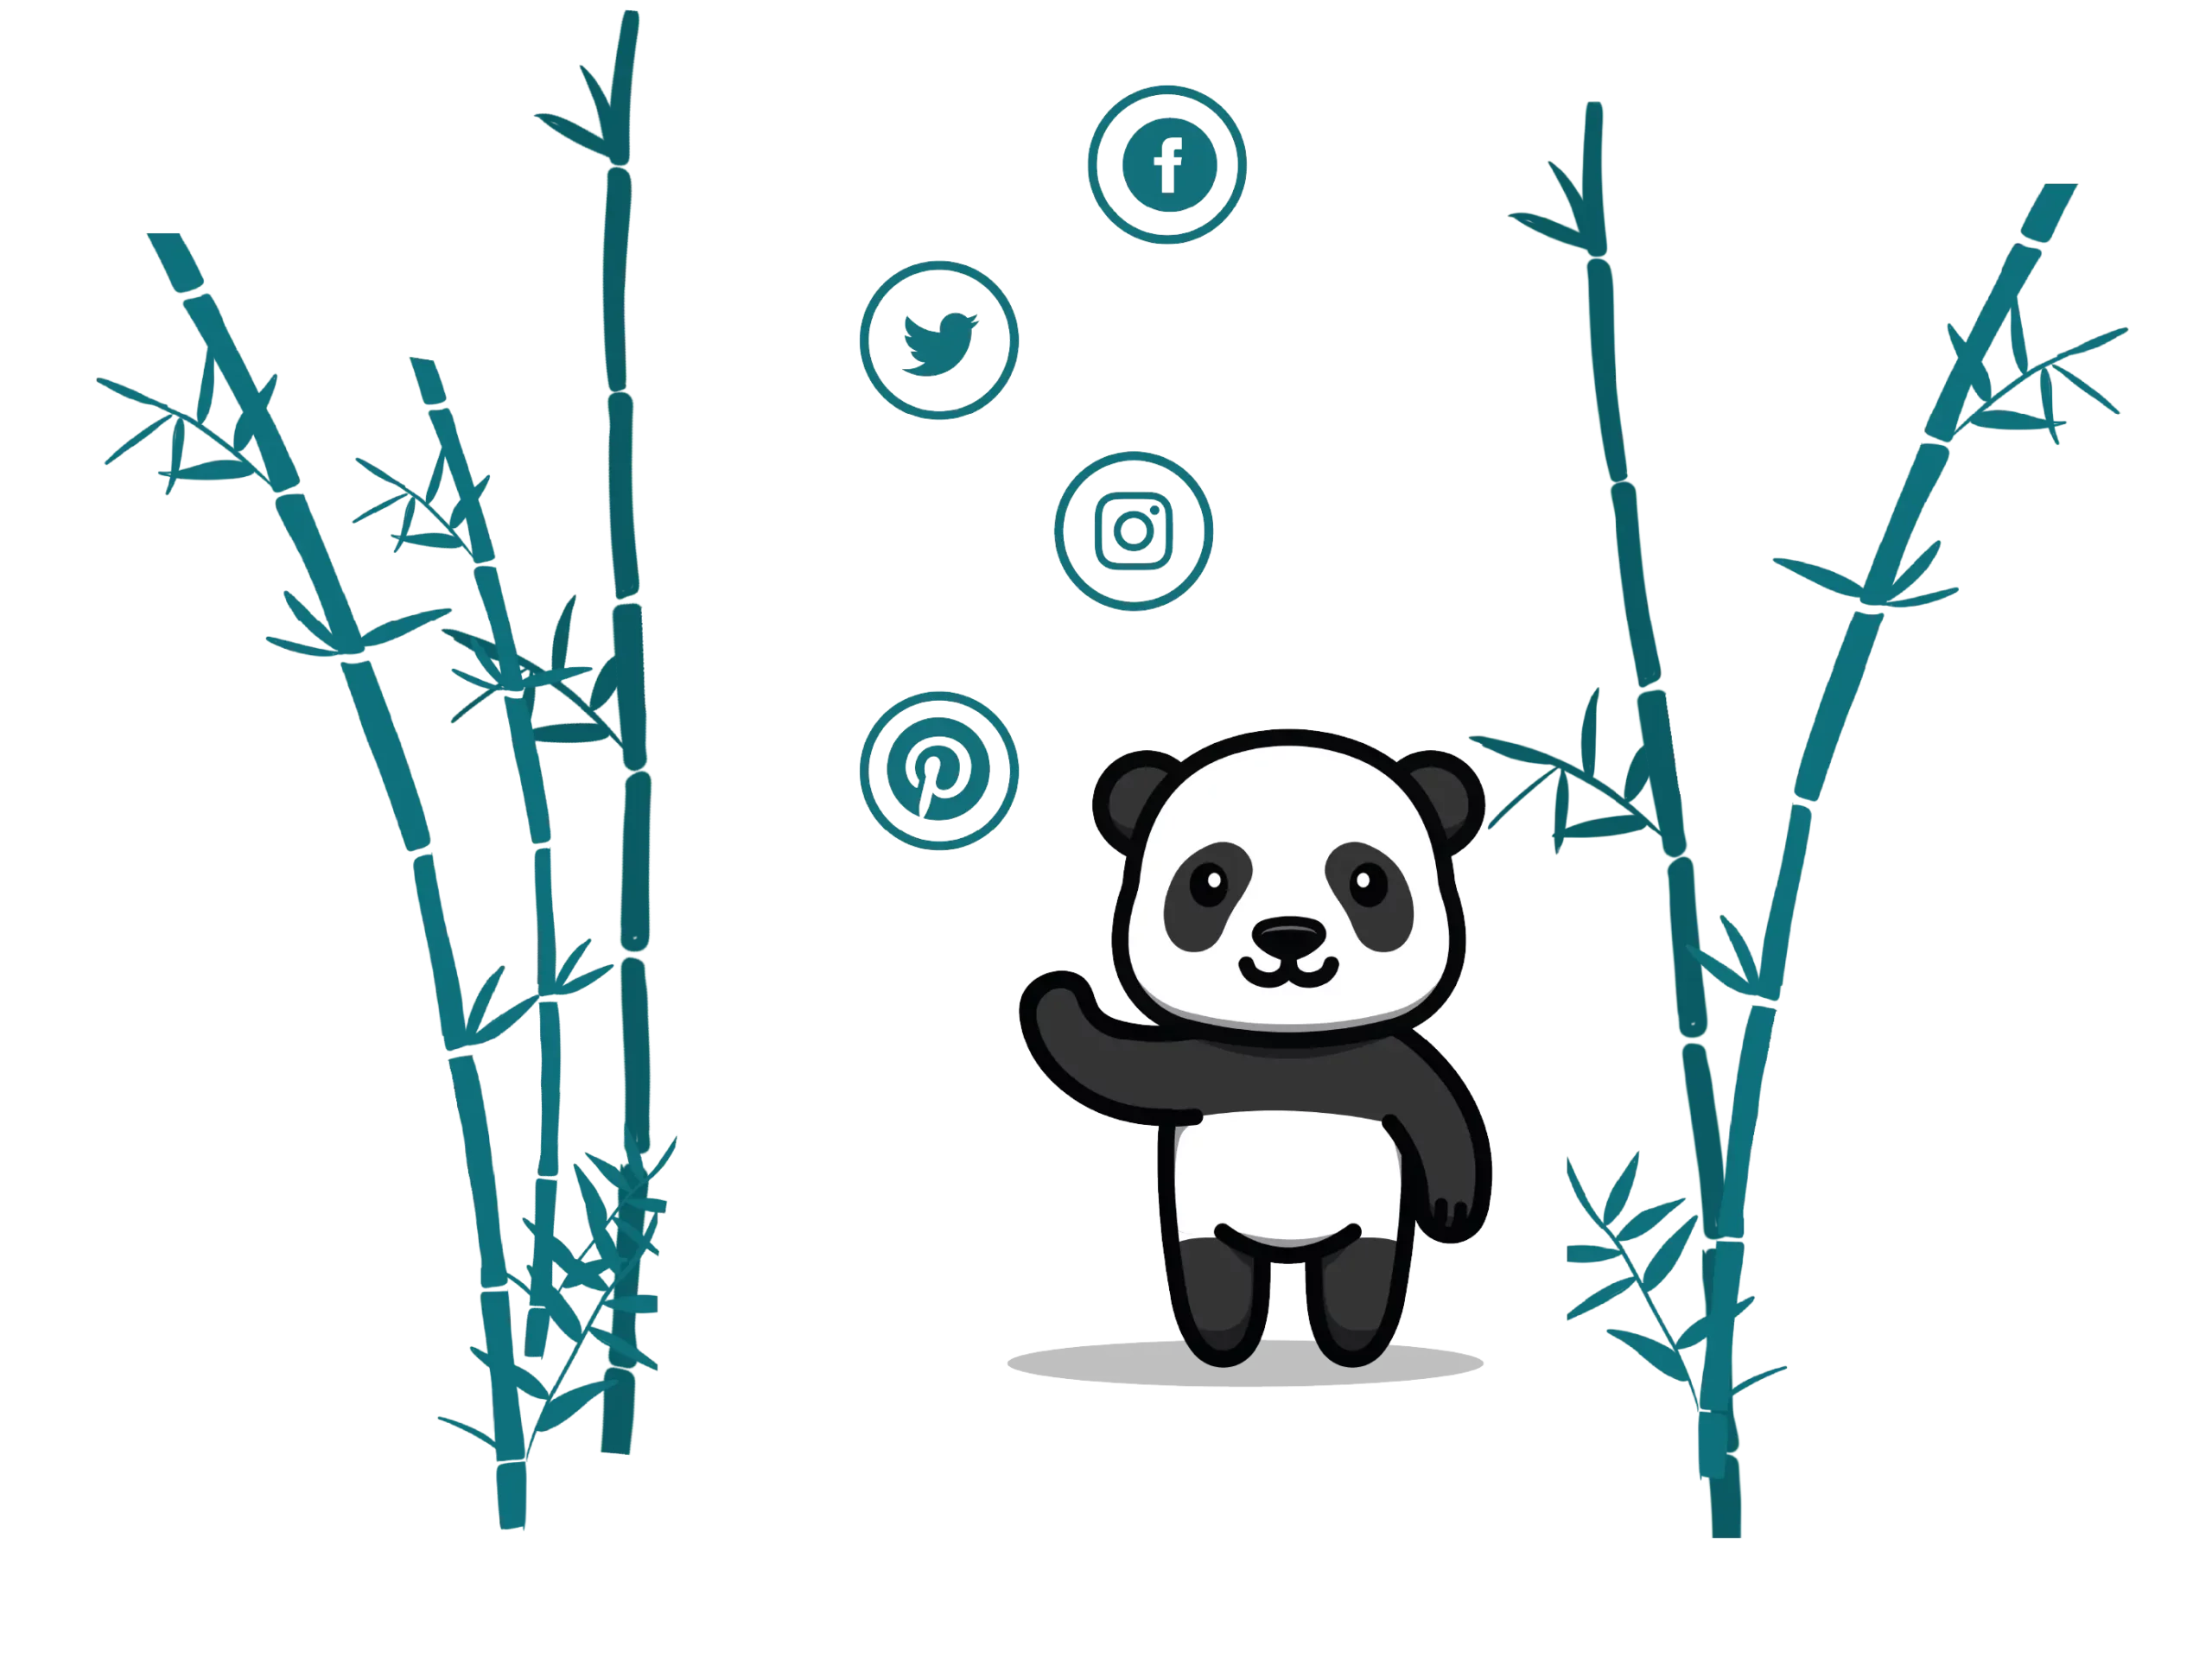 Panda thinking about social networks and how to develop brand awareness